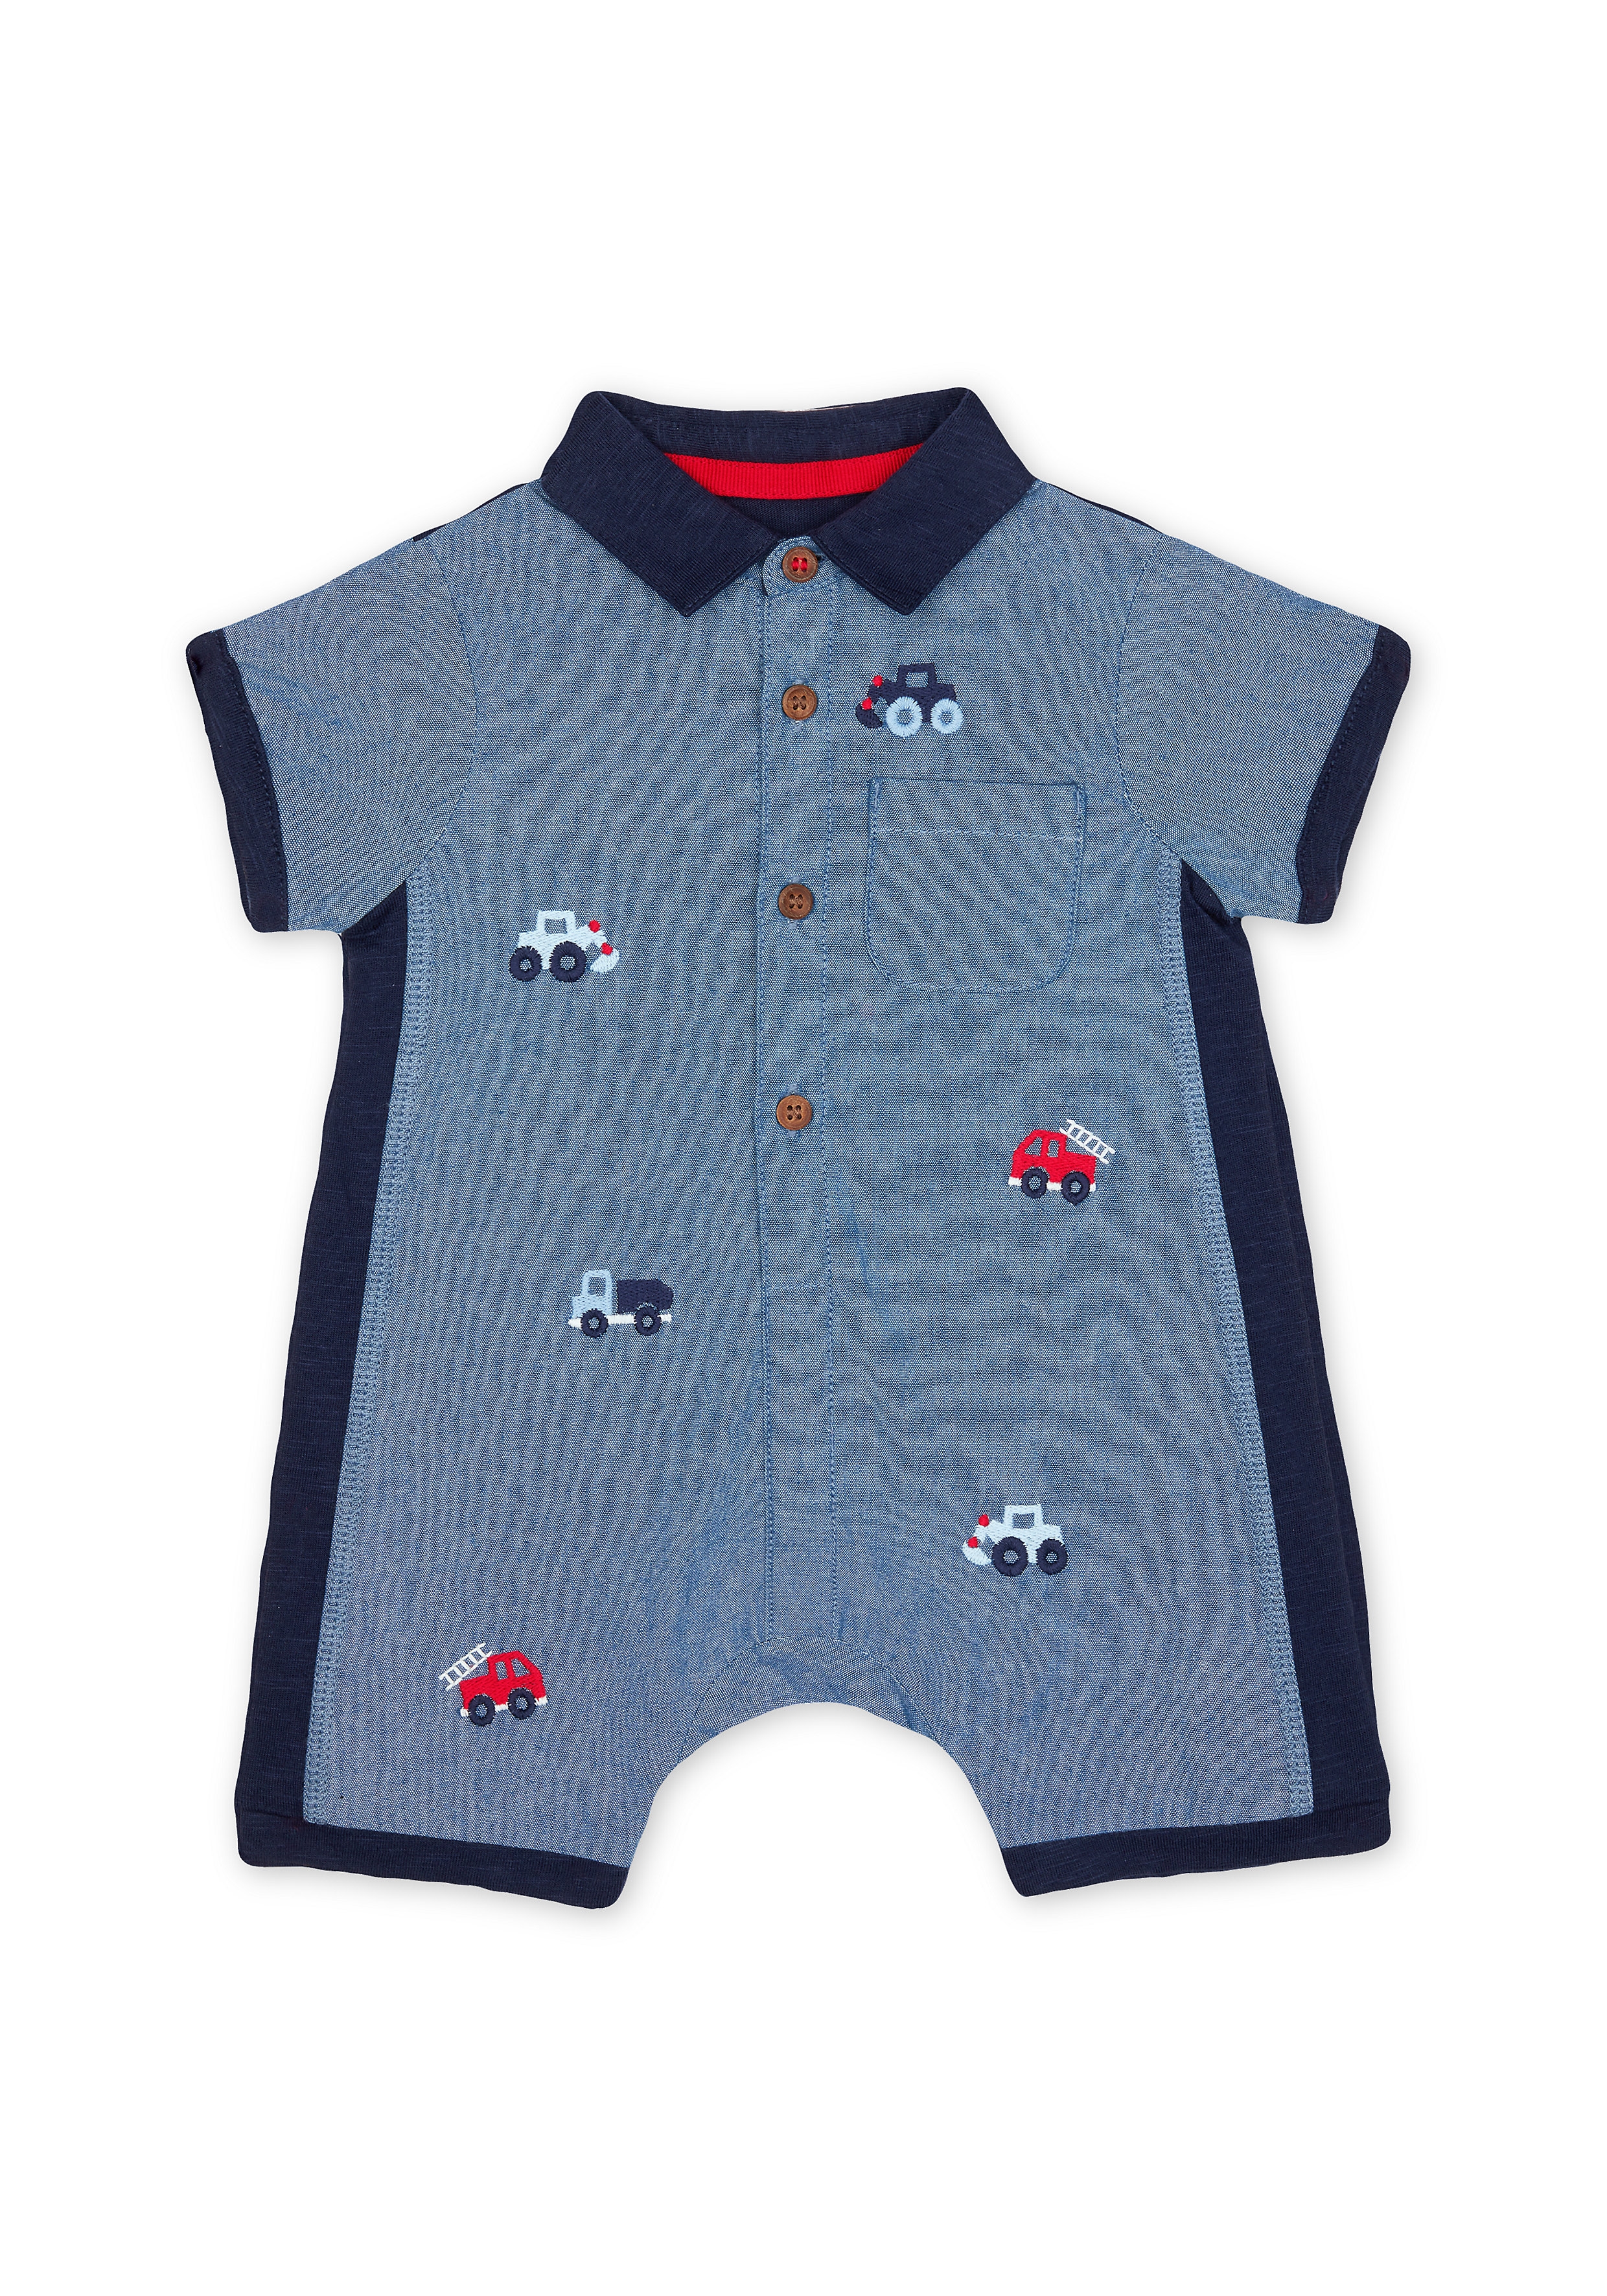 Mothercare | Boys Half Sleeves Romper Vehicle Embroidery - Navy 0